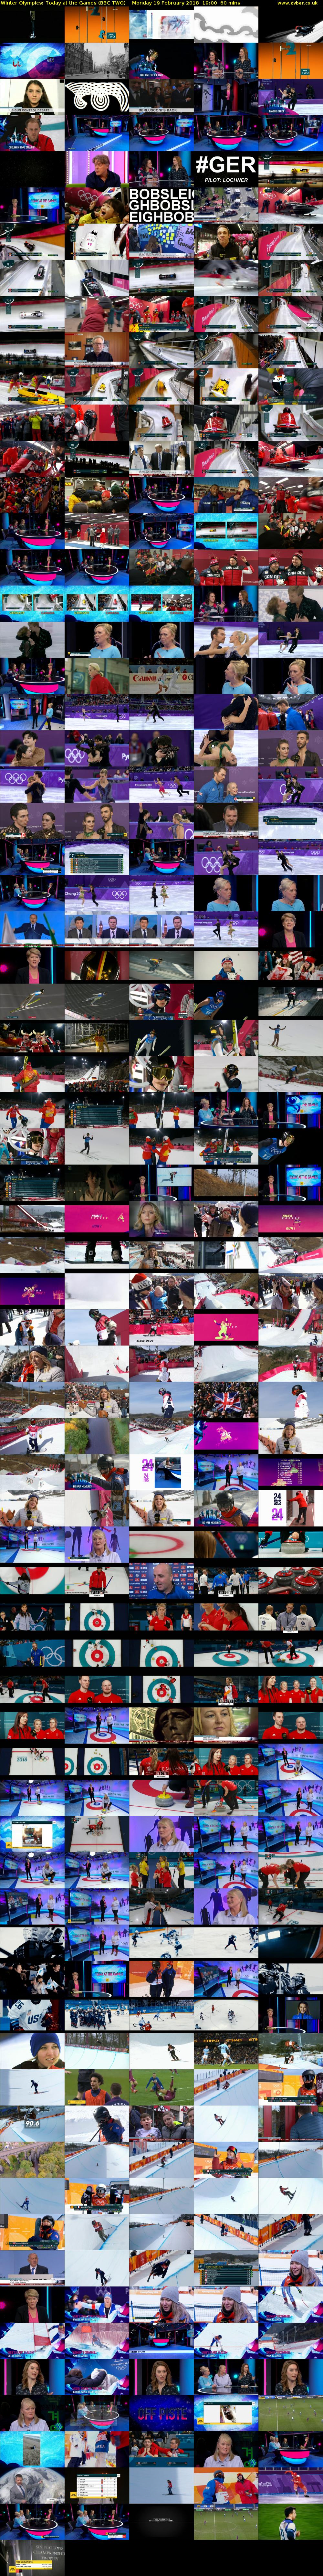 Winter Olympics: Today at the Games (BBC TWO) Monday 19 February 2018 19:00 - 20:00